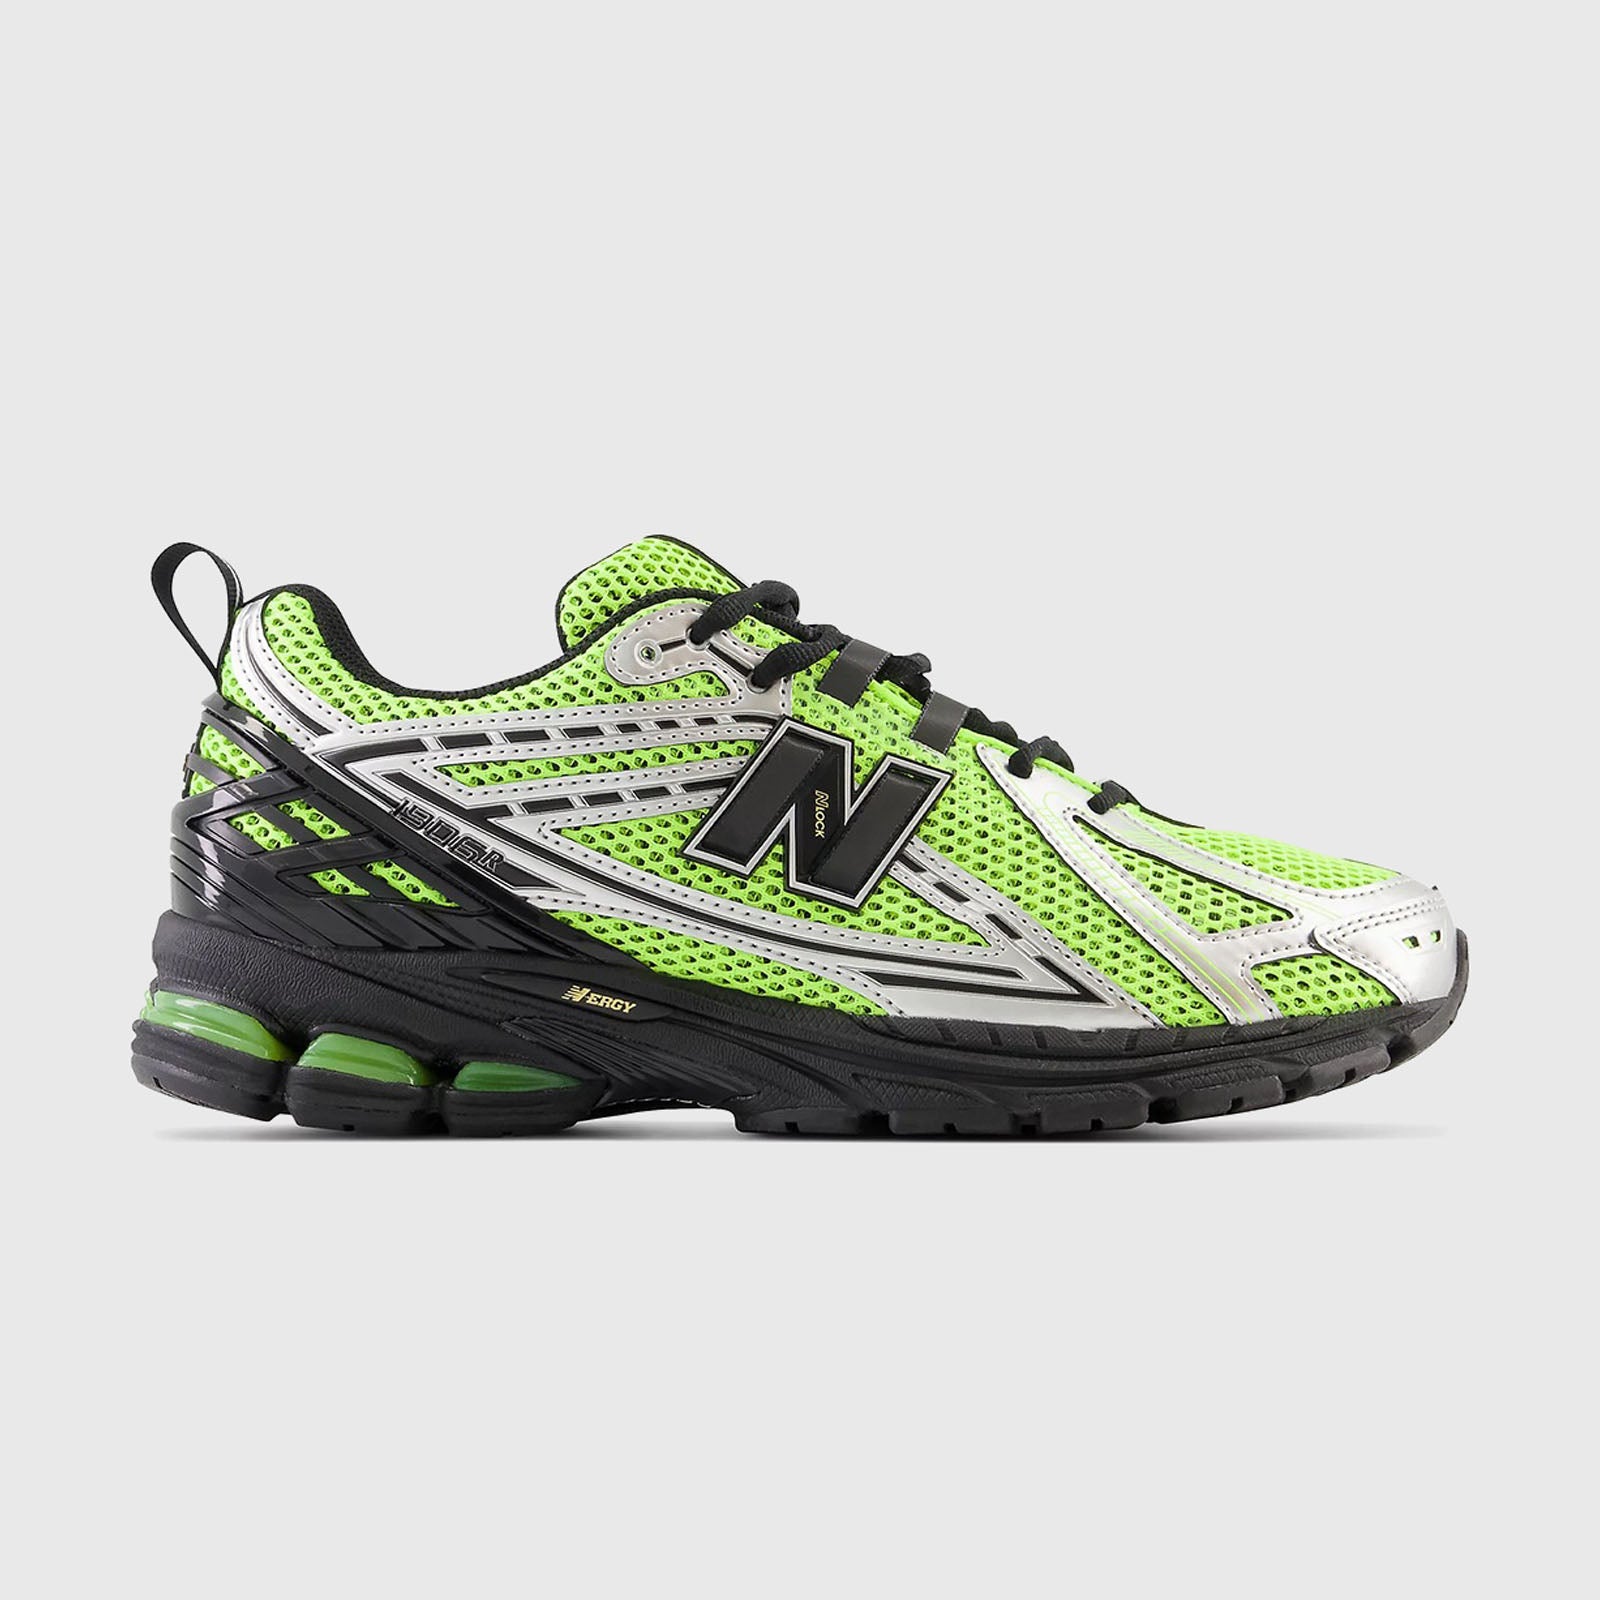 New Balance Sneaker Neon Green Synthetic - 7